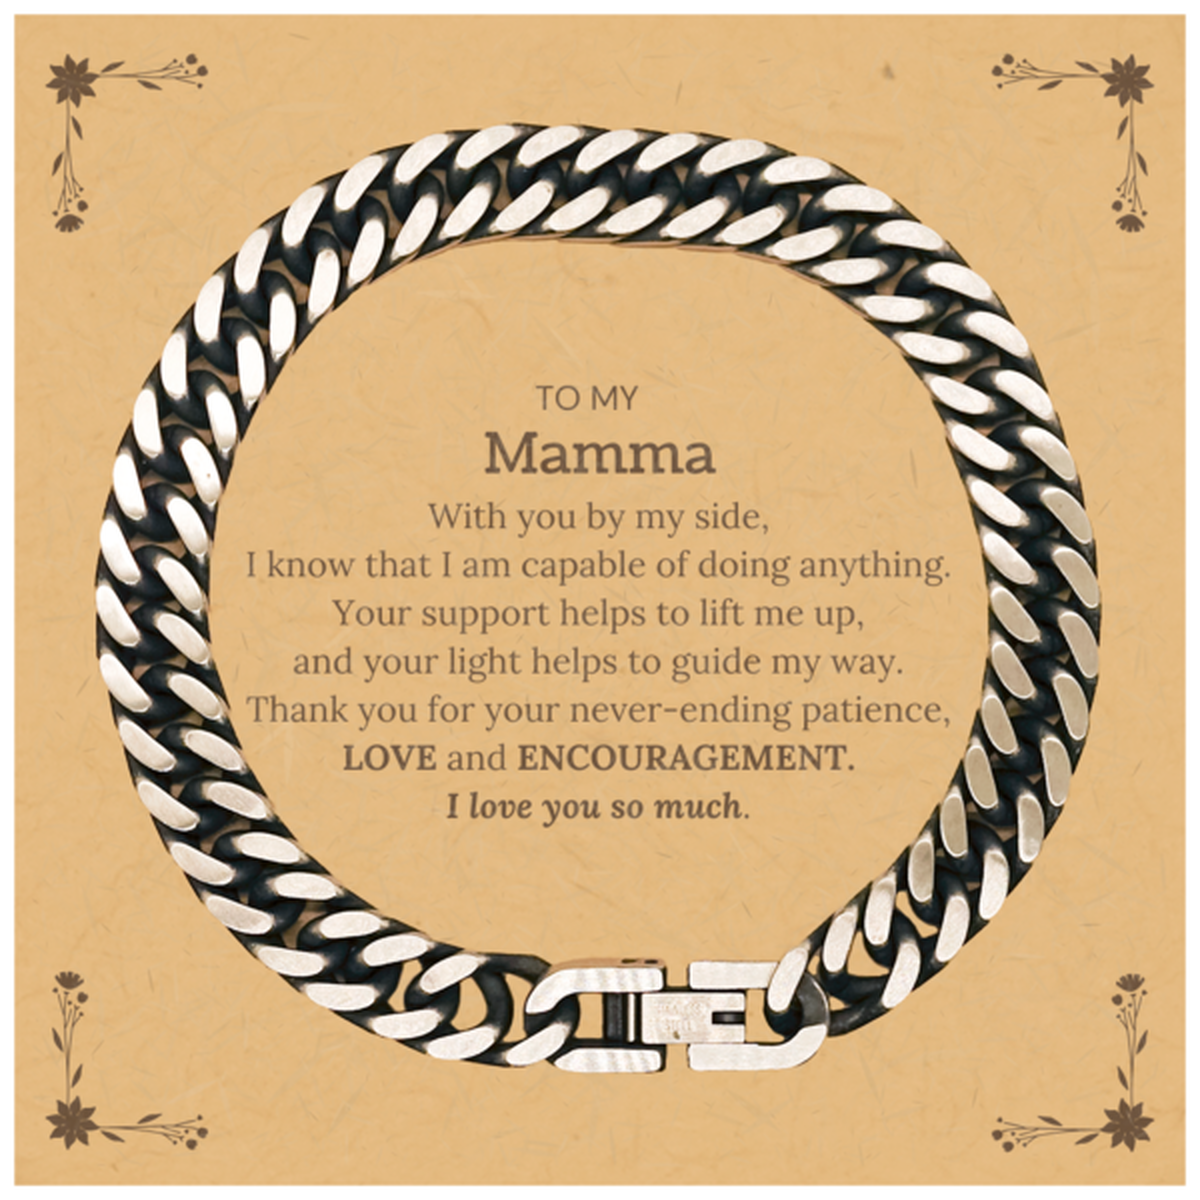 Appreciation Mamma Cuban Link Chain Bracelet Gifts, To My Mamma Birthday Christmas Wedding Keepsake Gifts for Mamma With you by my side, I know that I am capable of doing anything. I love you so much